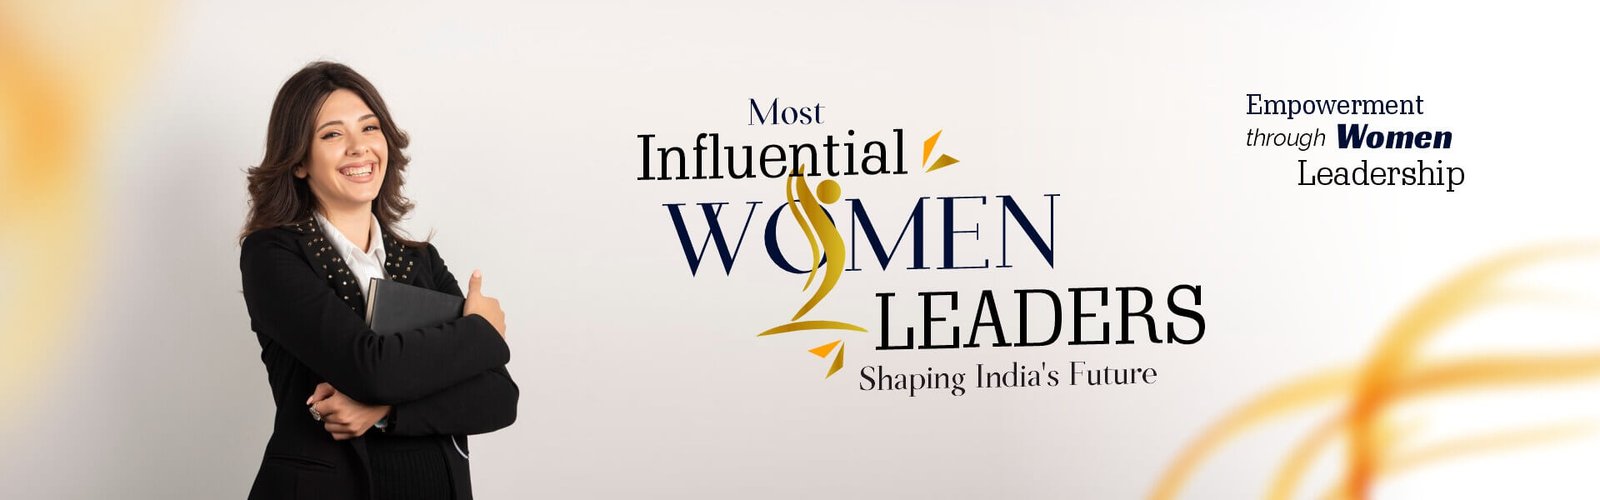 Most Influential Women Leaders Shaping India's Future